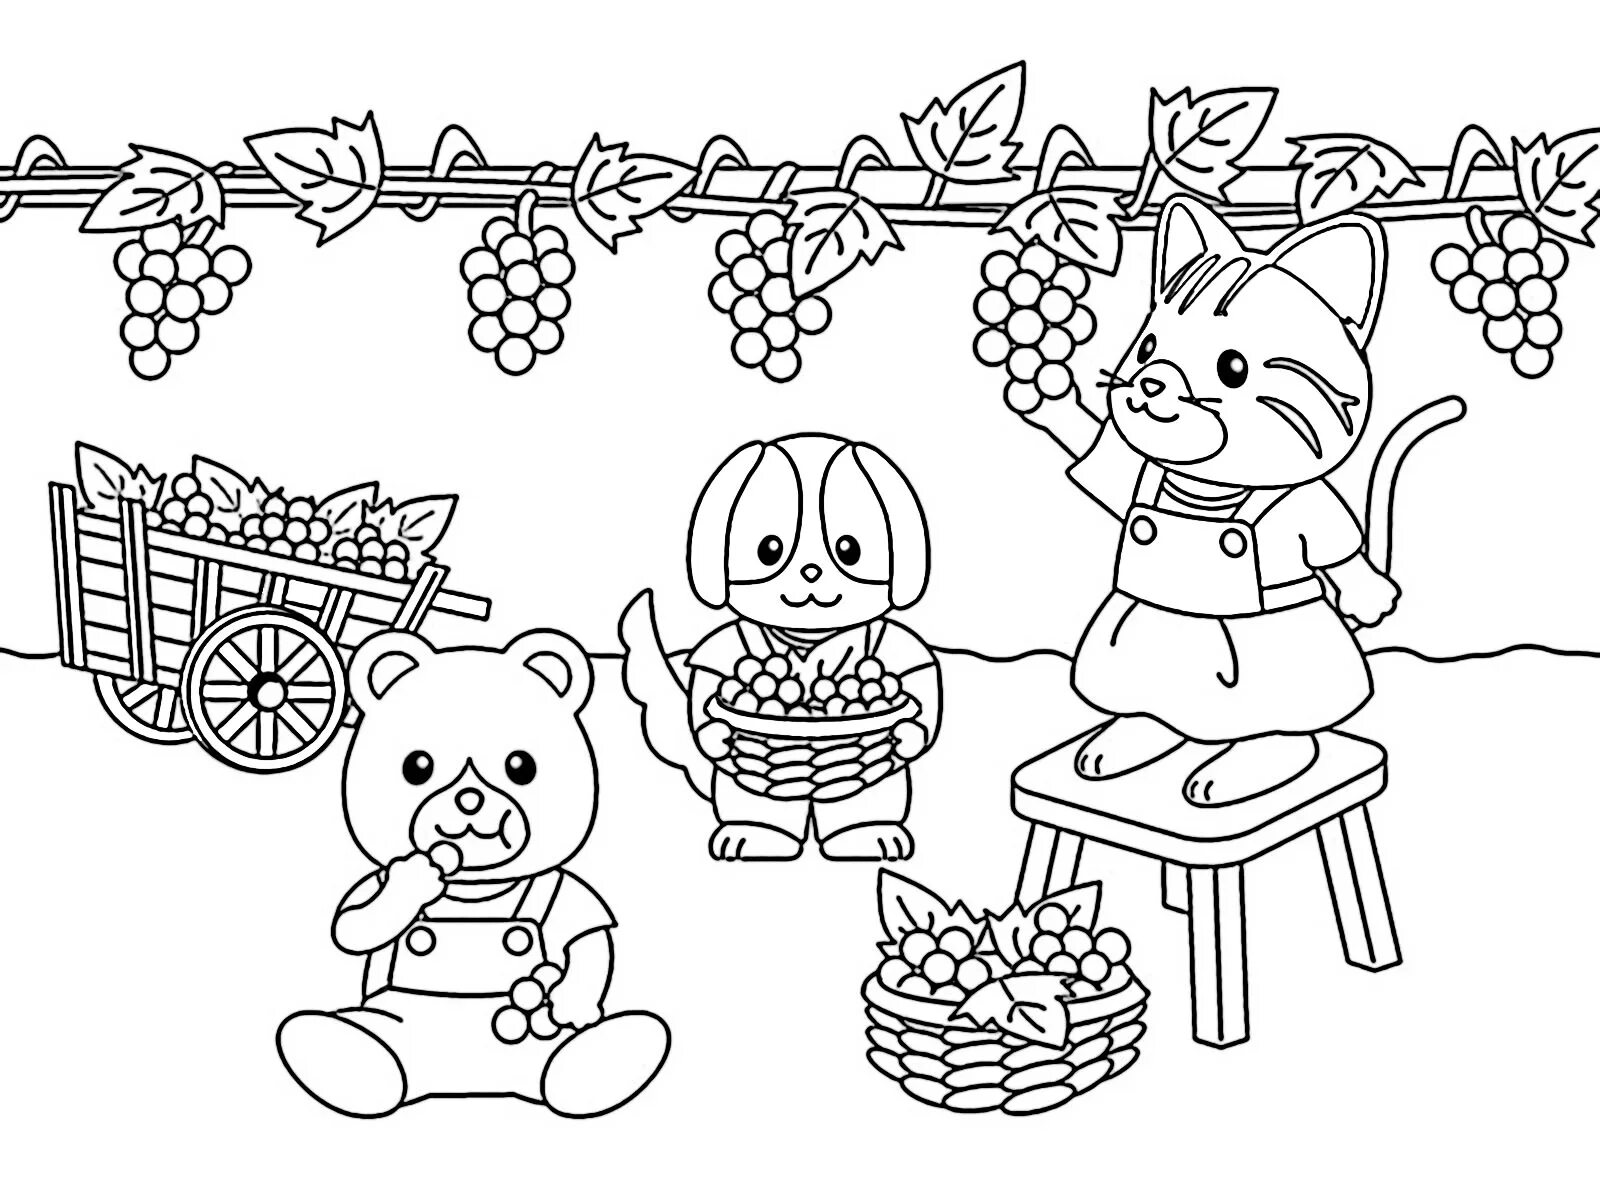 Great sylvan families coloring page